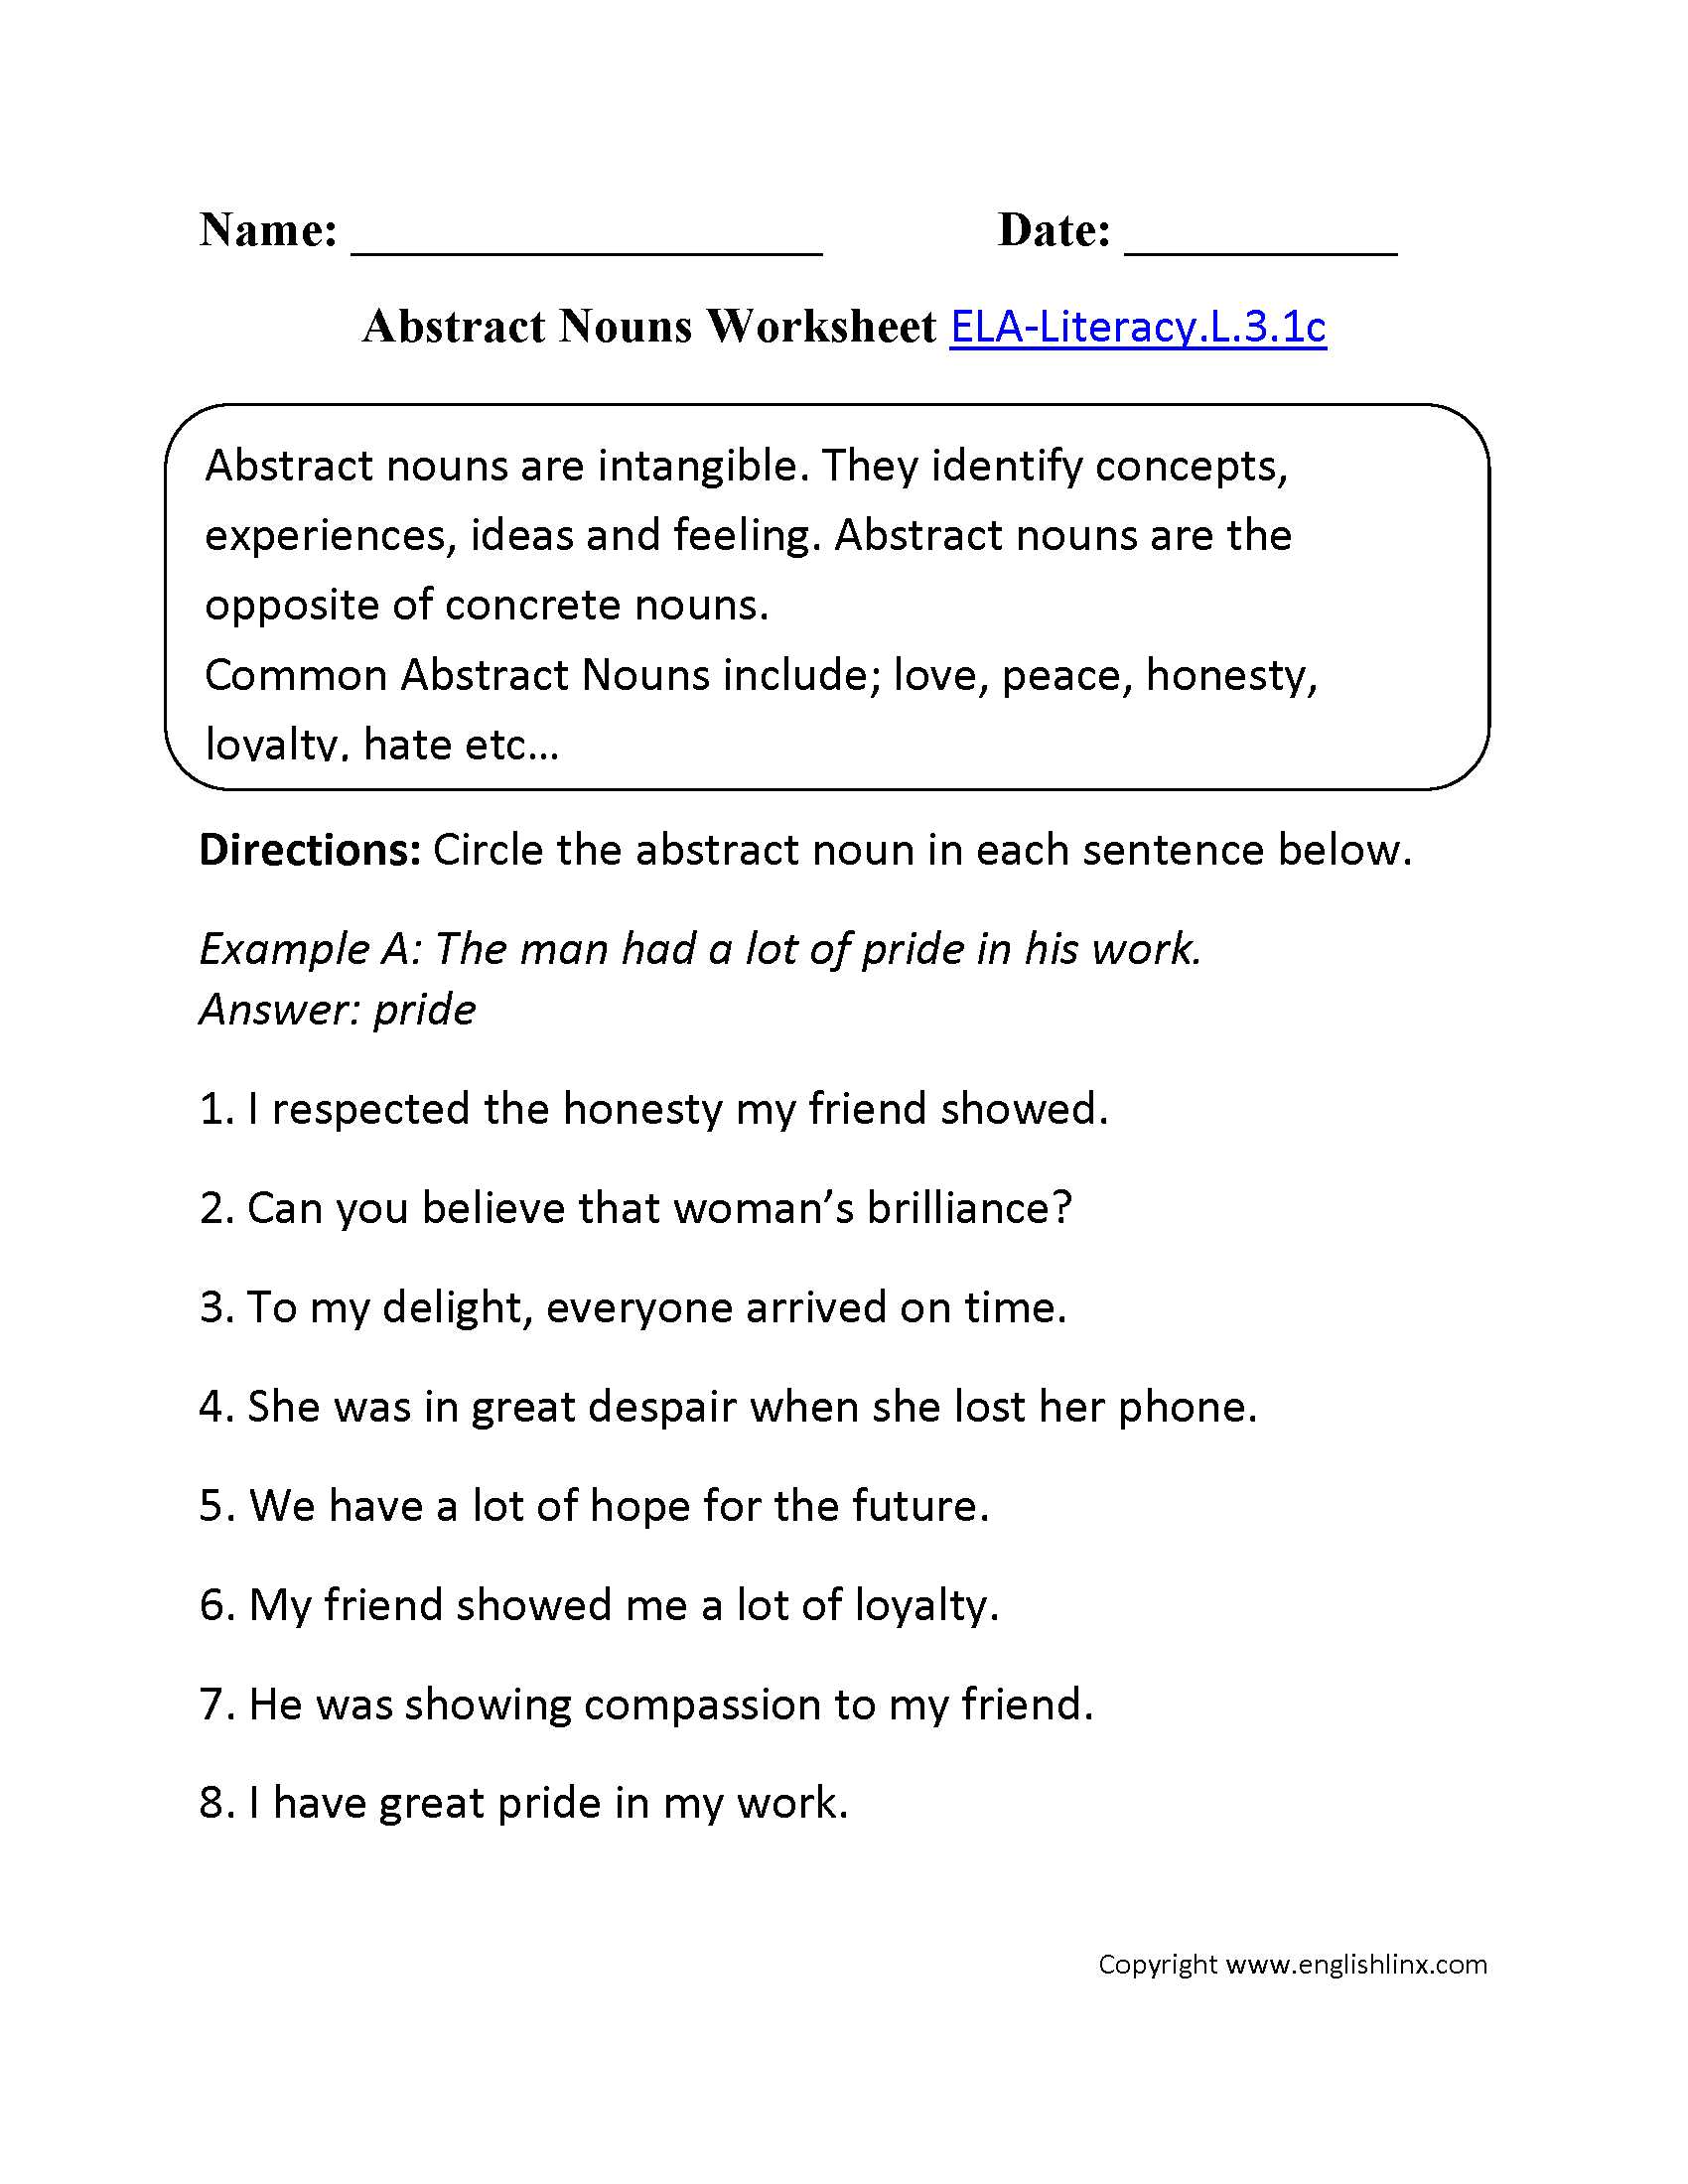 Identify Nouns and Adjectives Worksheets or Abstract Nouns Worksheet 1 Ela Literacy L 3 1c Language Worksheet